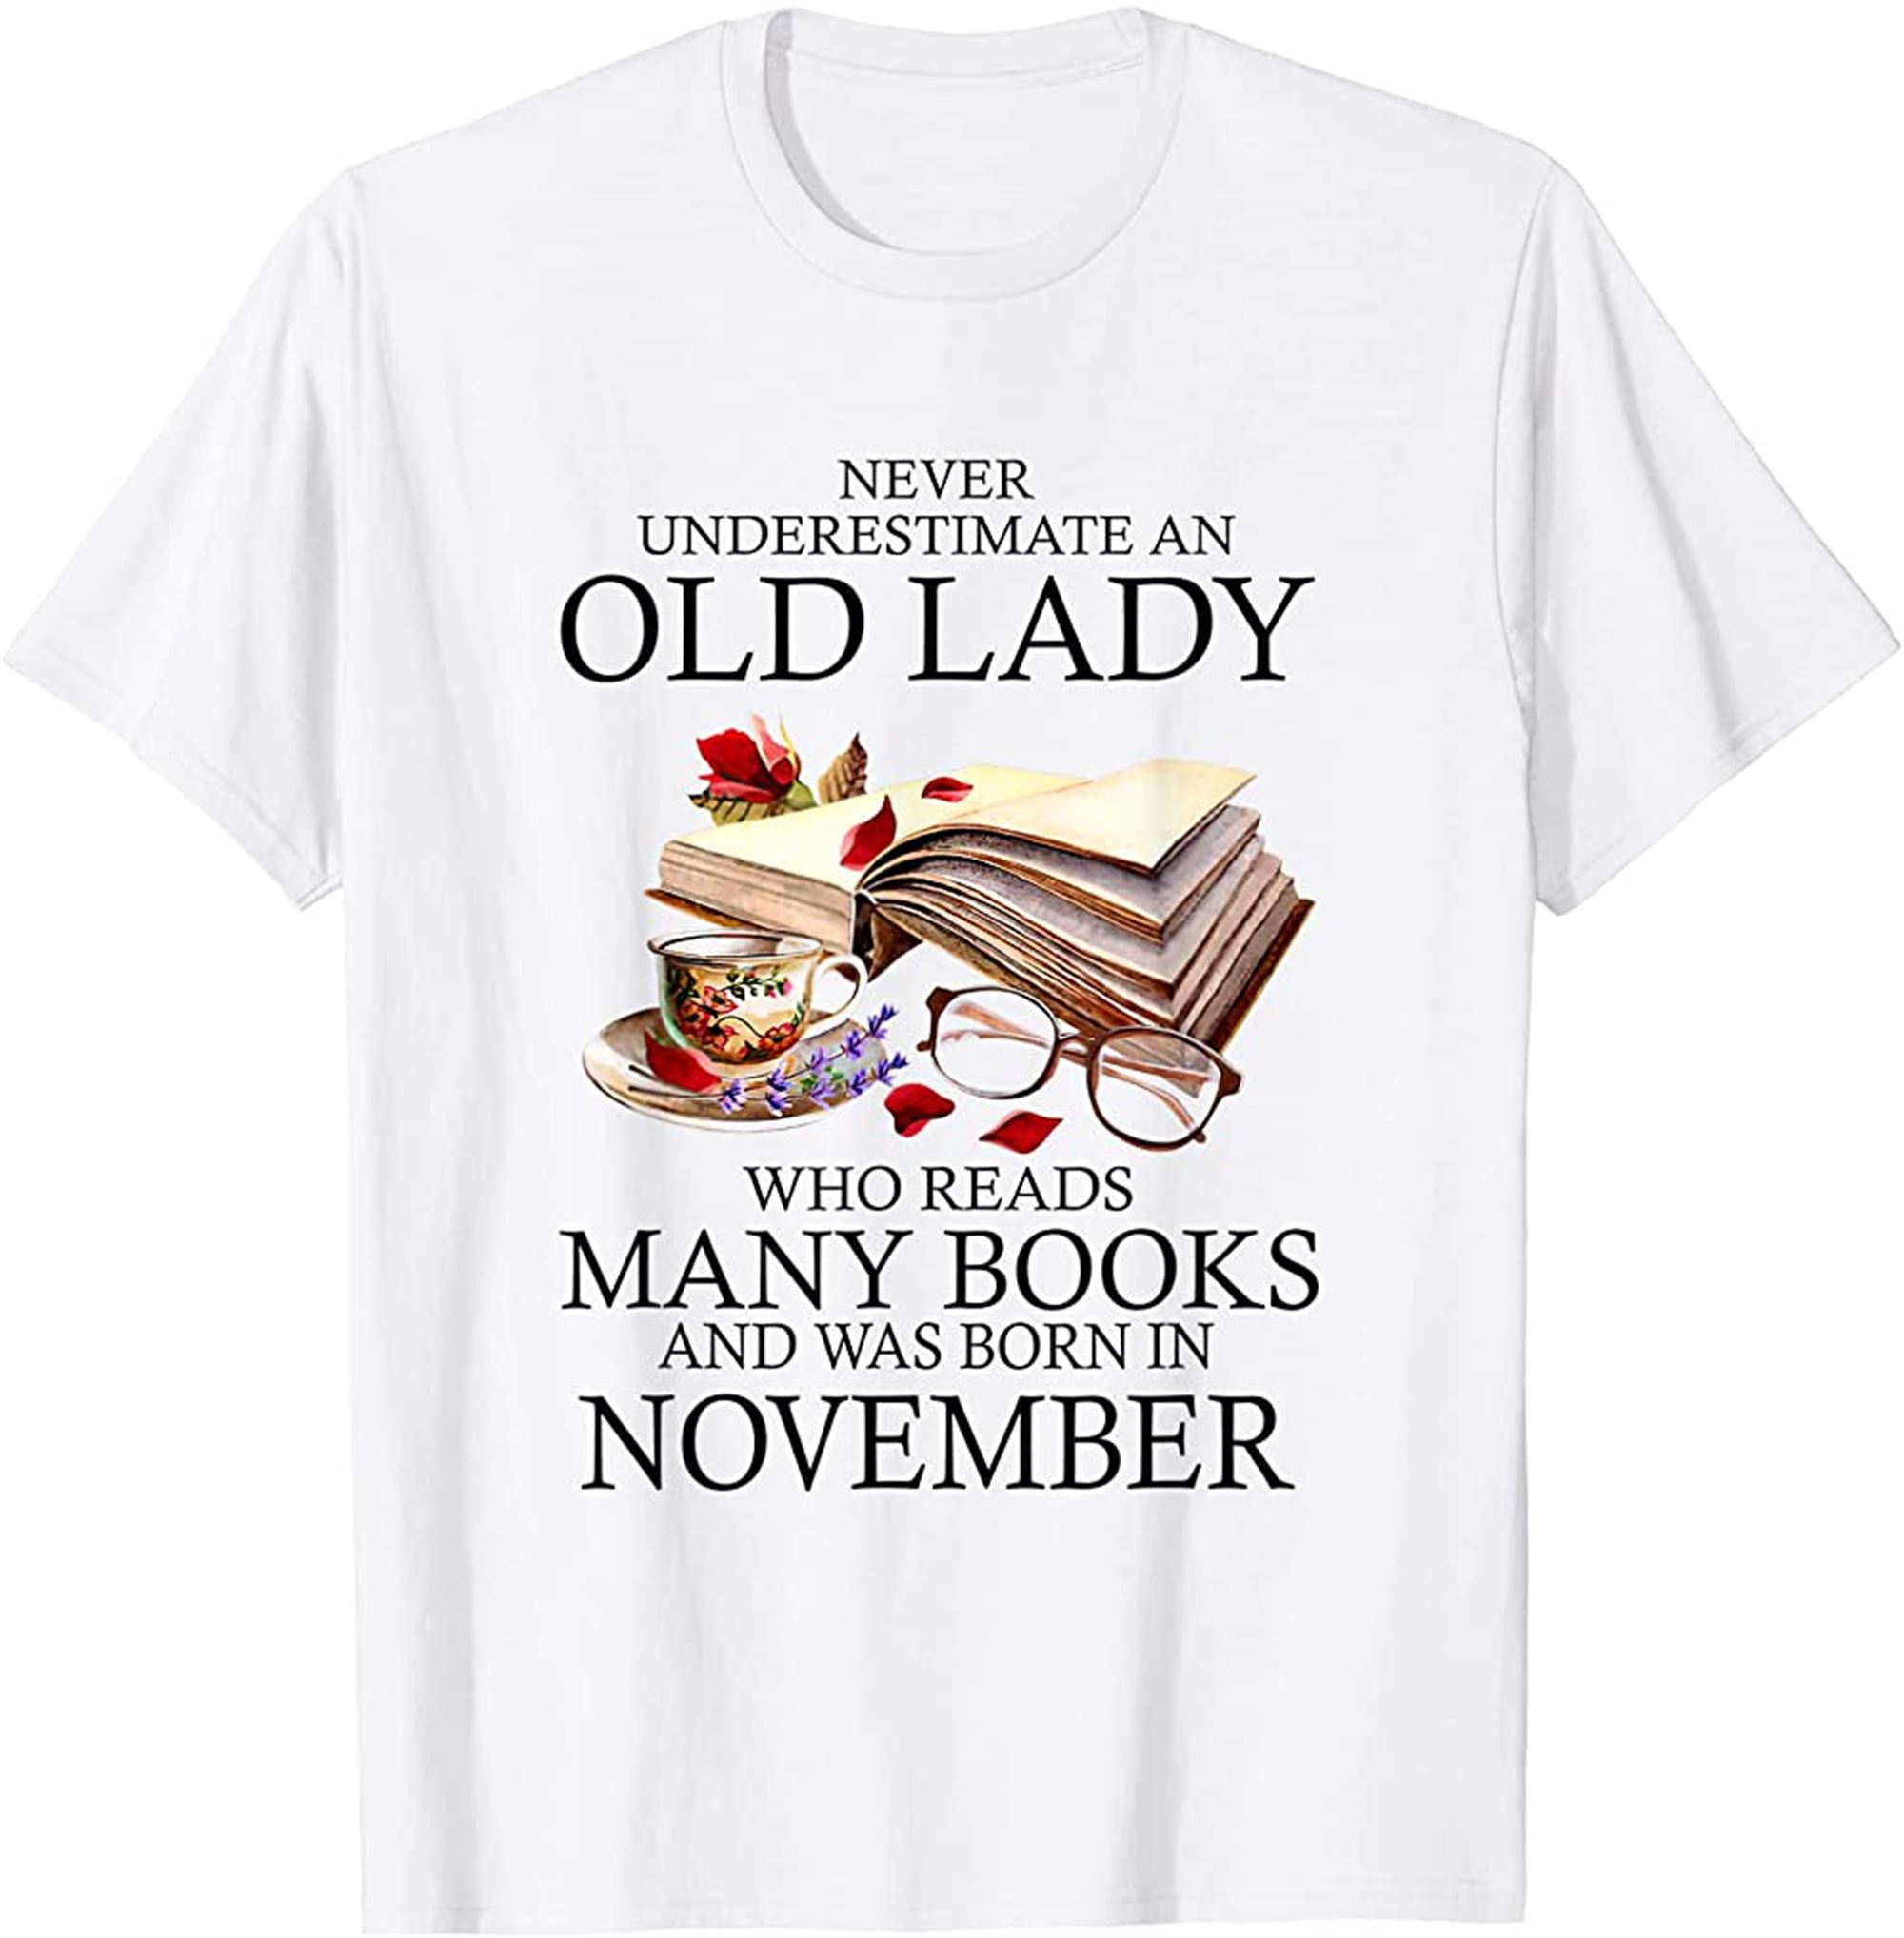 November An Old Lady Who Reads Many Books T-shirt Full Size Up To 5xl